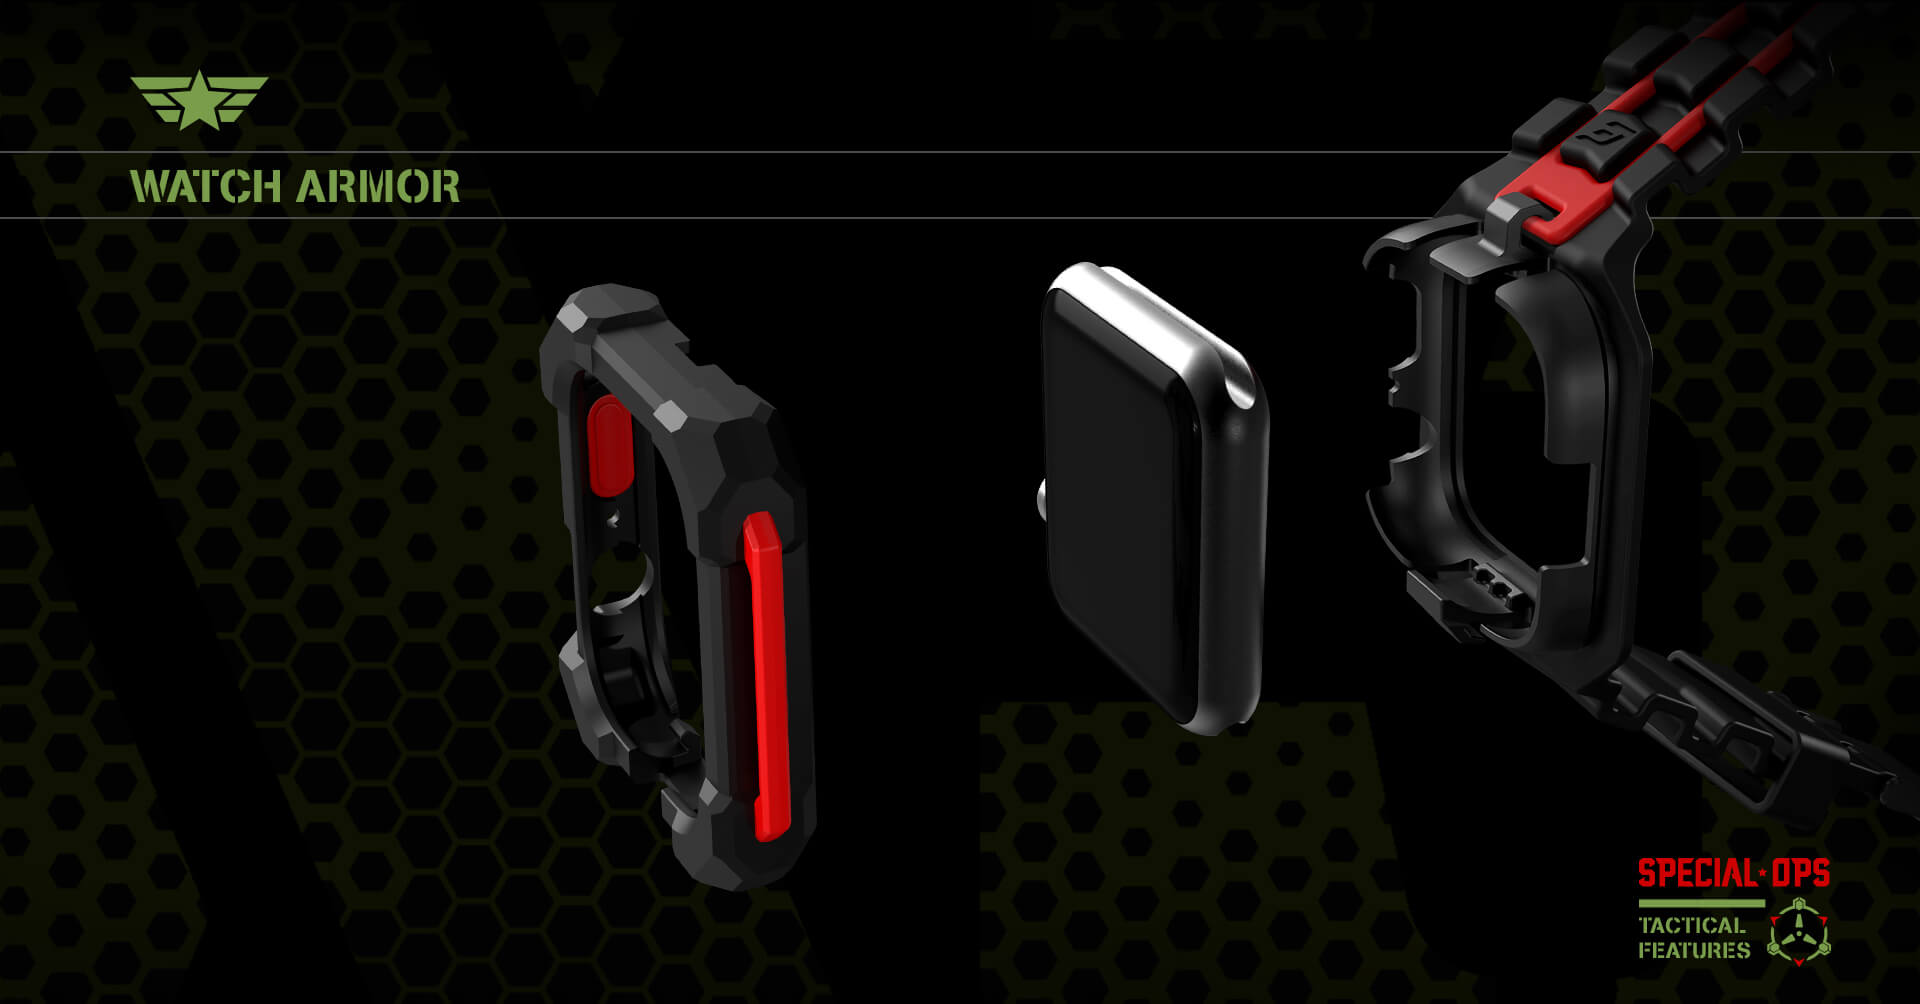 Black Ops Tactical Features — The Ultimate Watch Armor